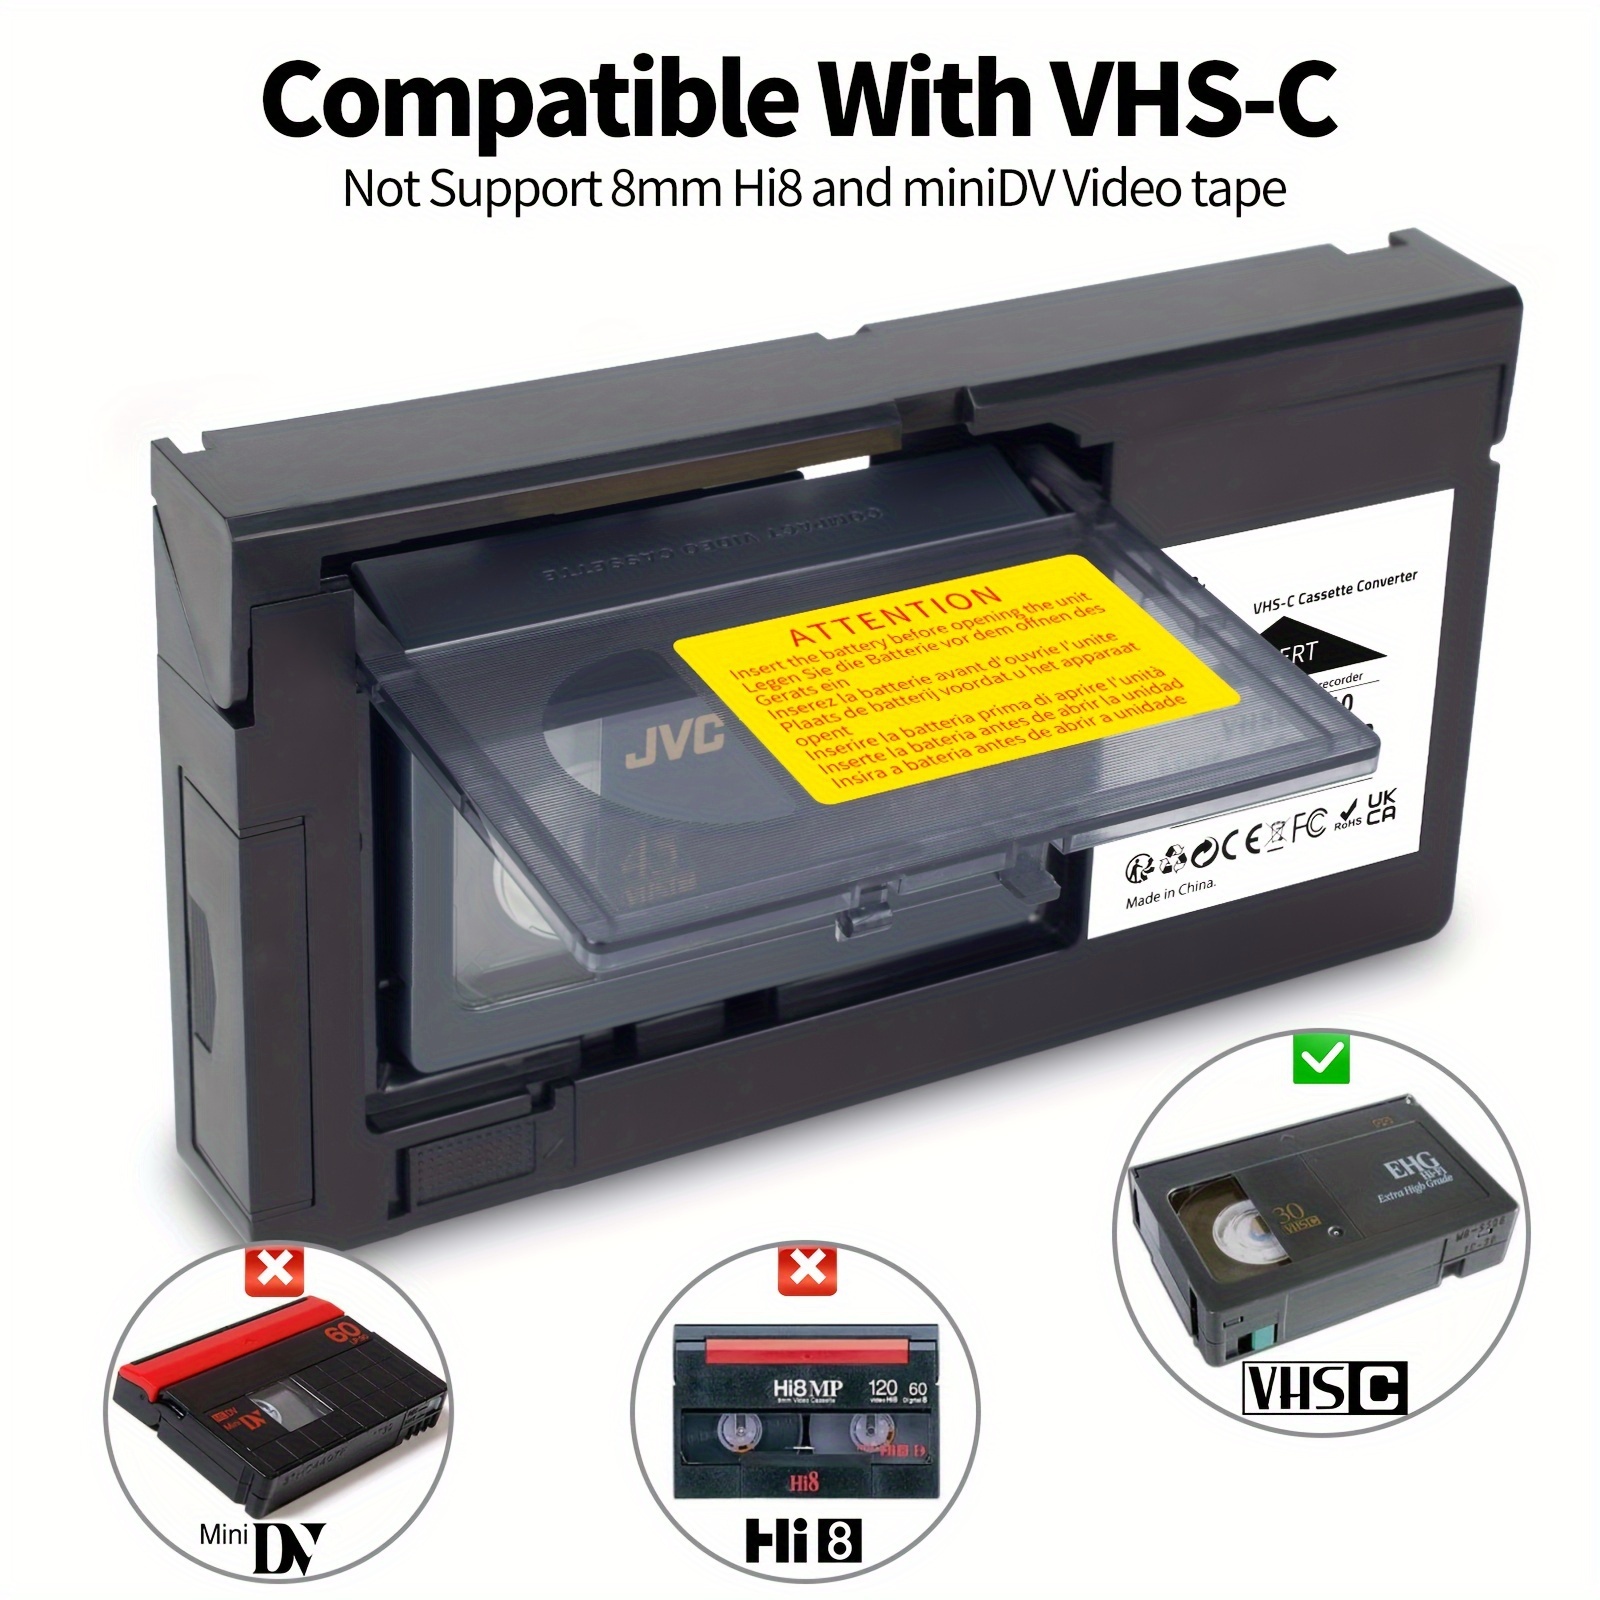  VHS-C Cassette Adapter Compatible with VHS-C SVHS Camcorders  JVC RCA Panasonic Motorized VHS Cassette Converter （NOT Compatible with 8mm  / MiniDV / Hi8） : Electronics